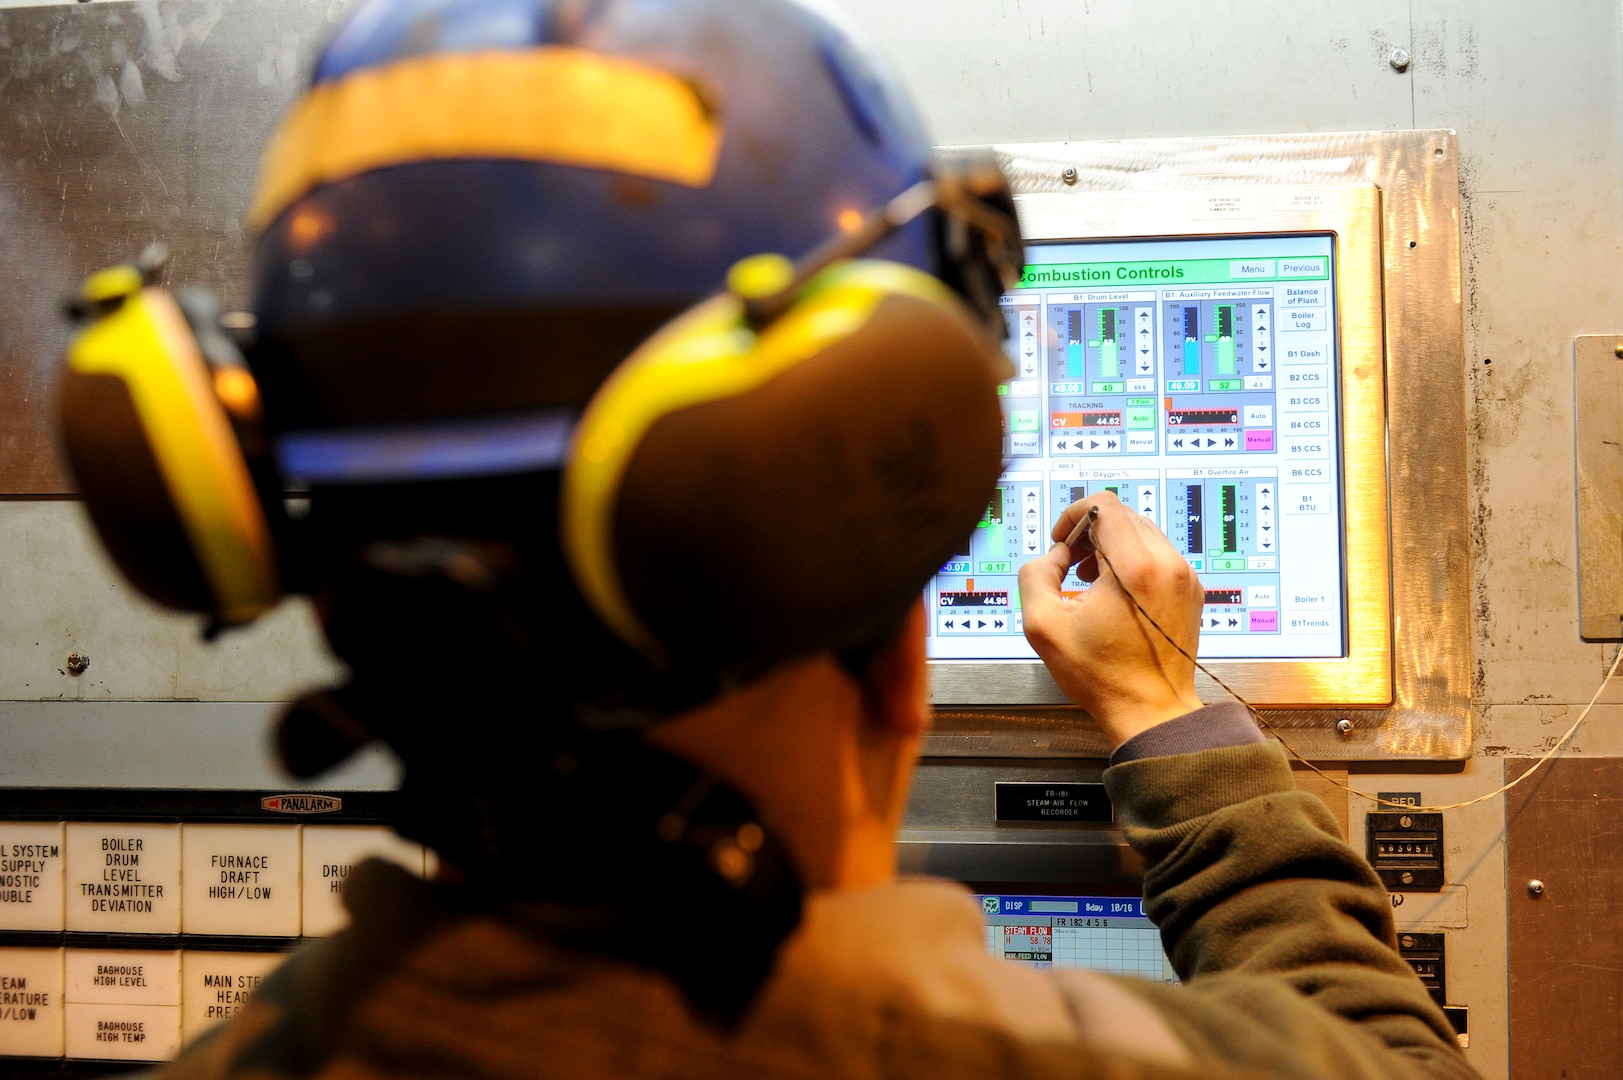 U.S. Air Force civilian Ian Martinez, a 354th Civil Engineer Squadron Central Heat and Power Plant (CHPP) assistant fireman, adjusts combustion controls Dec. 21, 2016, at Eielson Air Force Base Alaska. The CHPP was built in the early 1950s and much of the original equipment remains in use today. (U.S. Air Force photo by Airman Isaac Johnson)